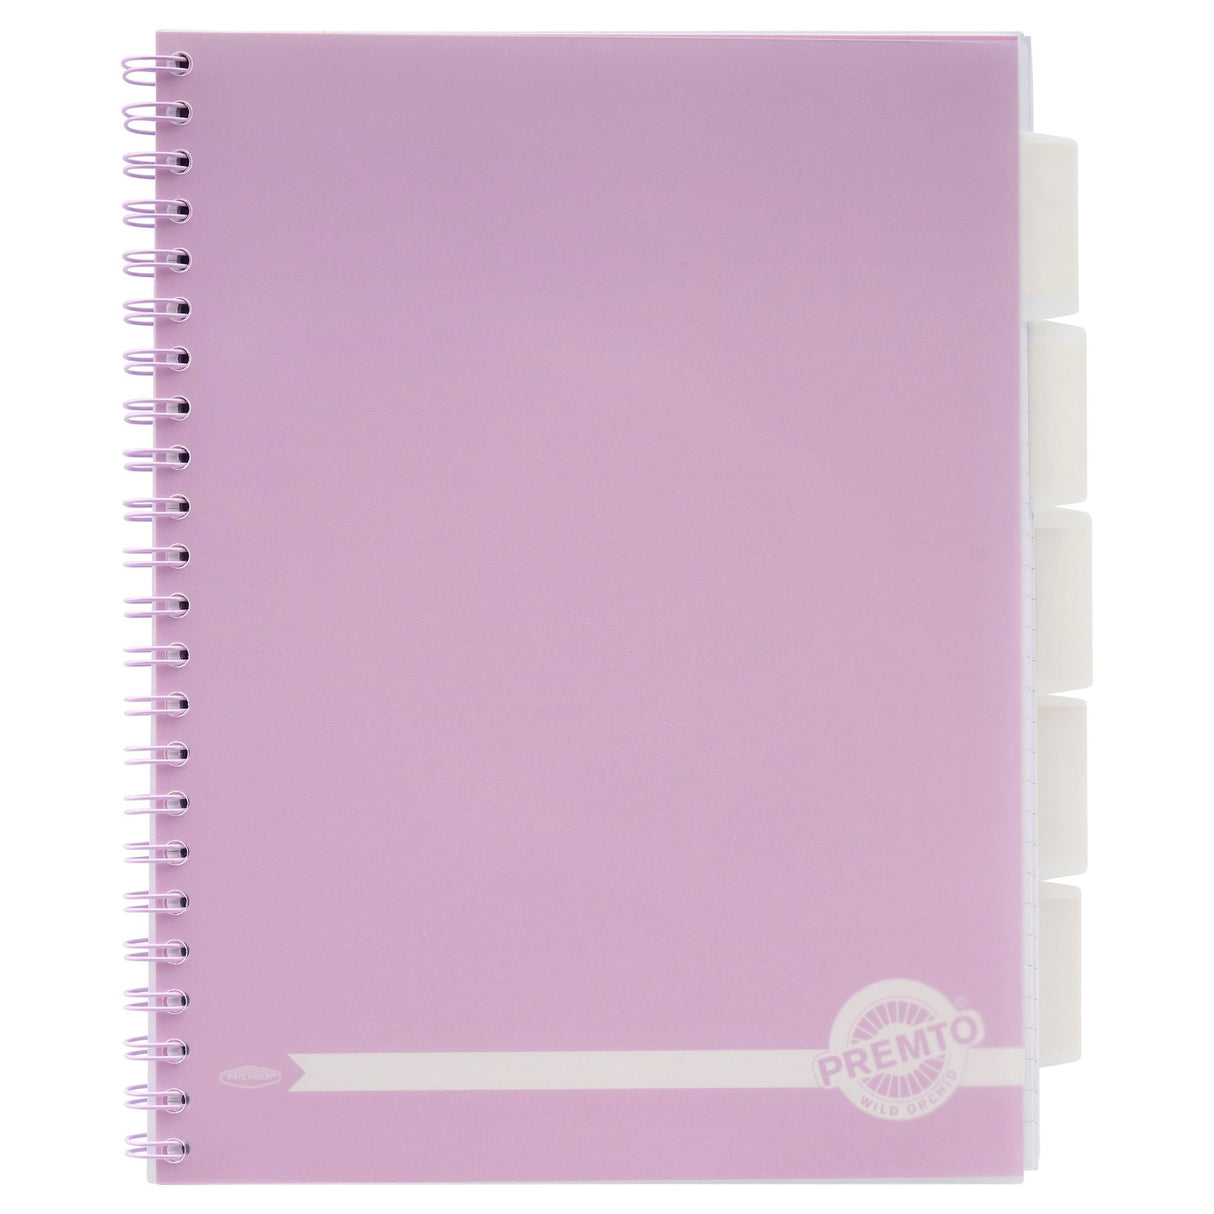 Premto Pastel A4 Wiro Project Book - 5 Subjects - 250 Pages - Wild Orchid | Stationery Shop UK